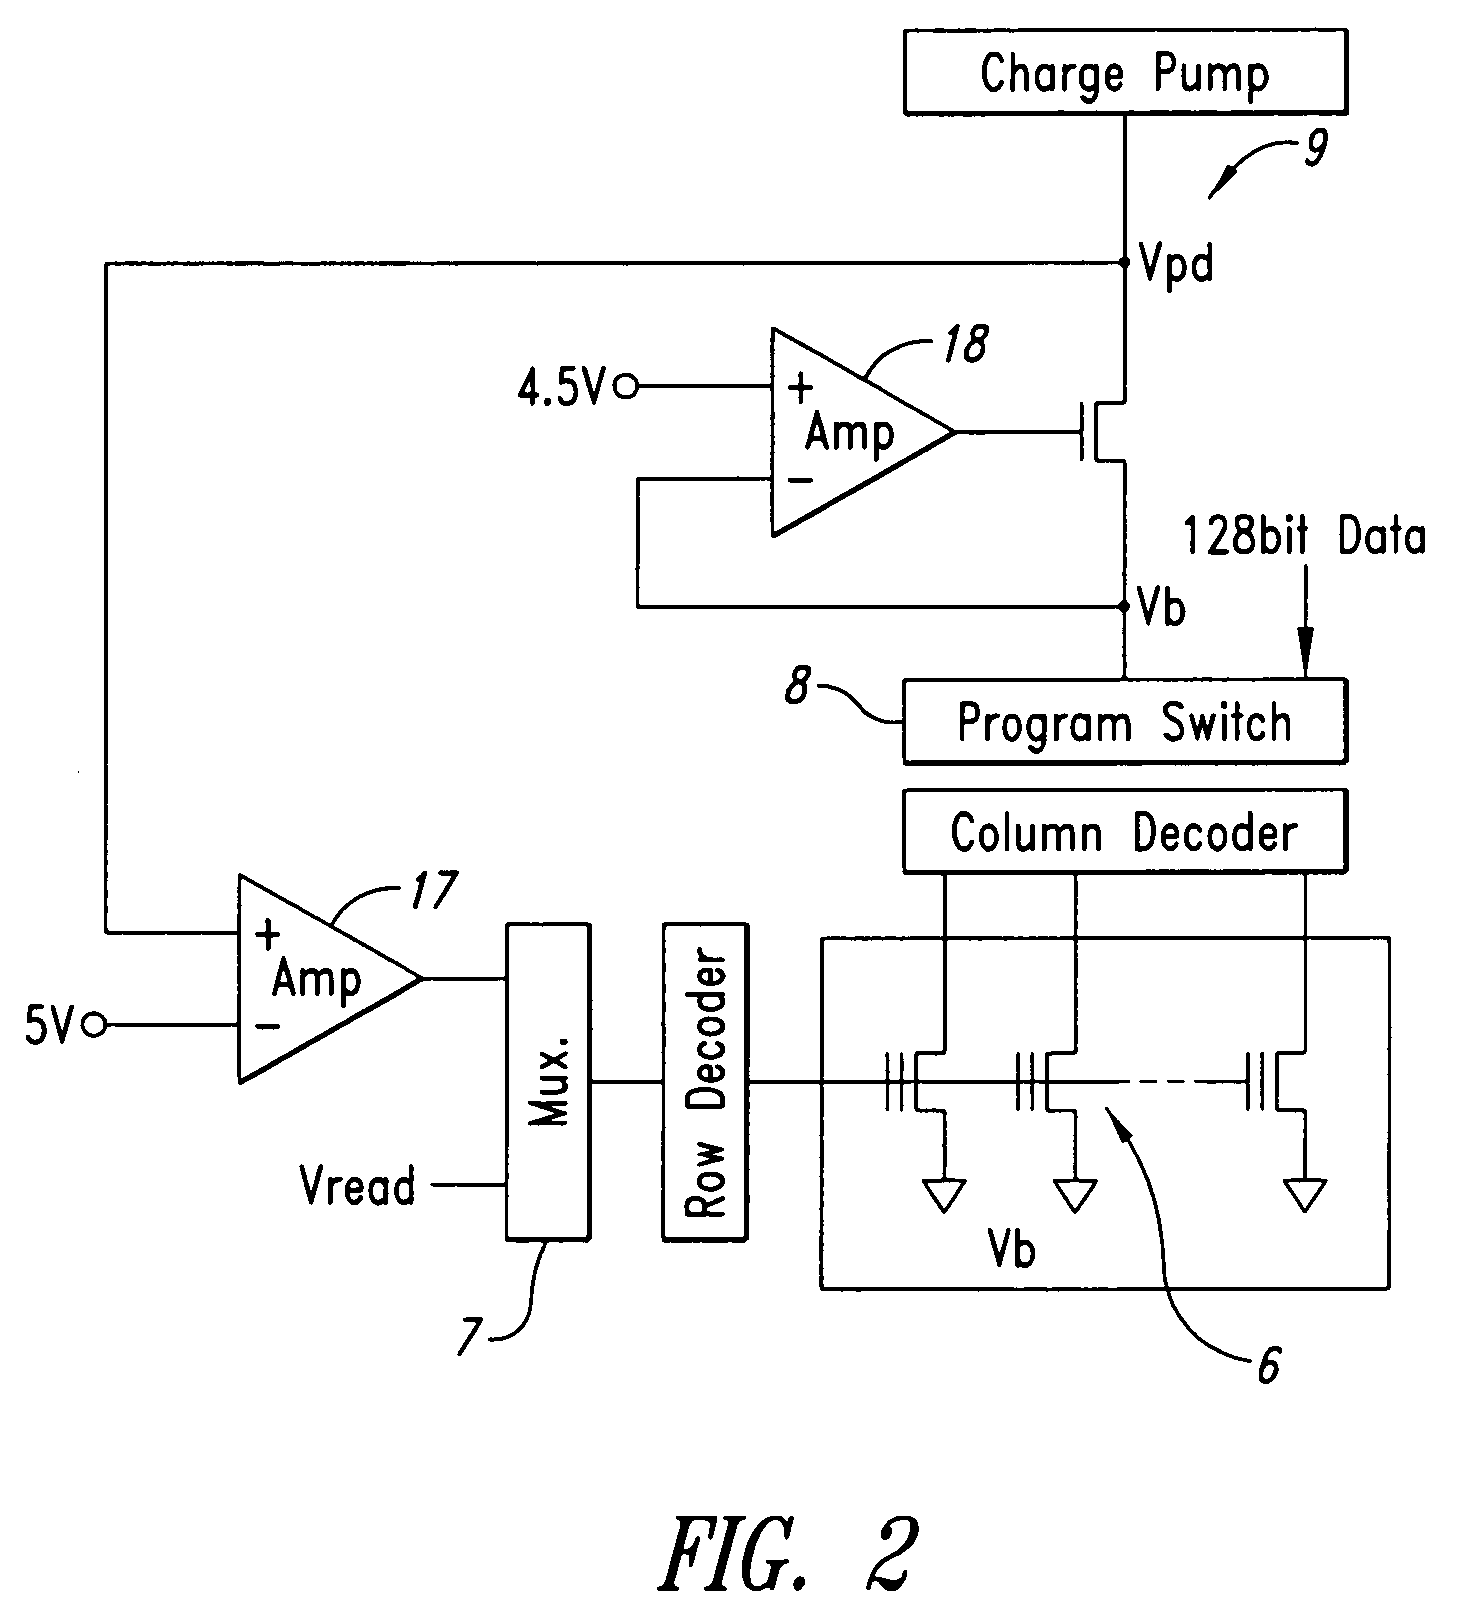 Embeddable flash memory system for non-volatile storage of code, data and bit-streams for embedded FPGA configurations